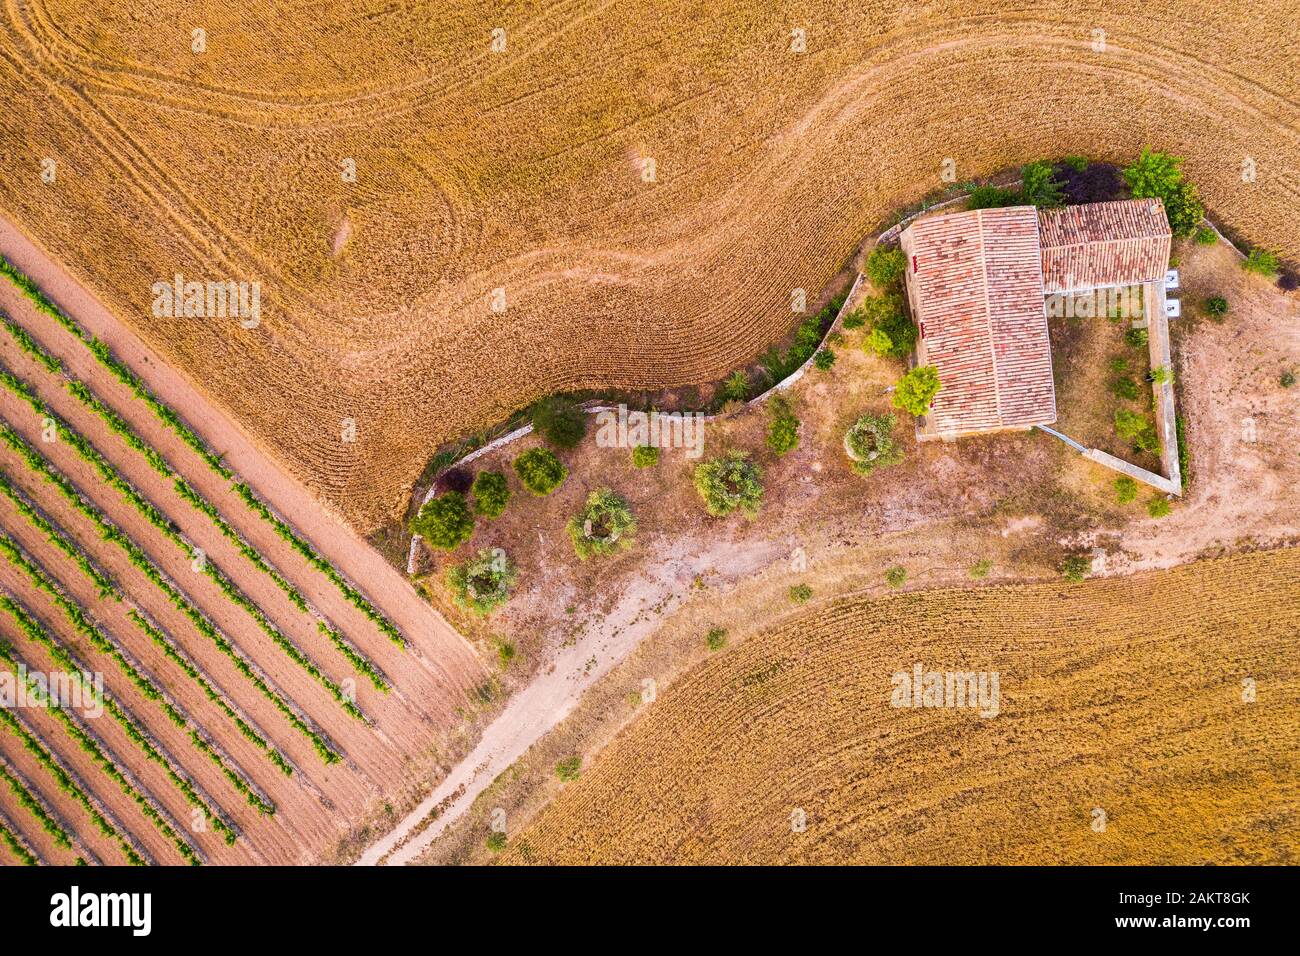 Agriculture landscape. Aerial view. Stock Photo